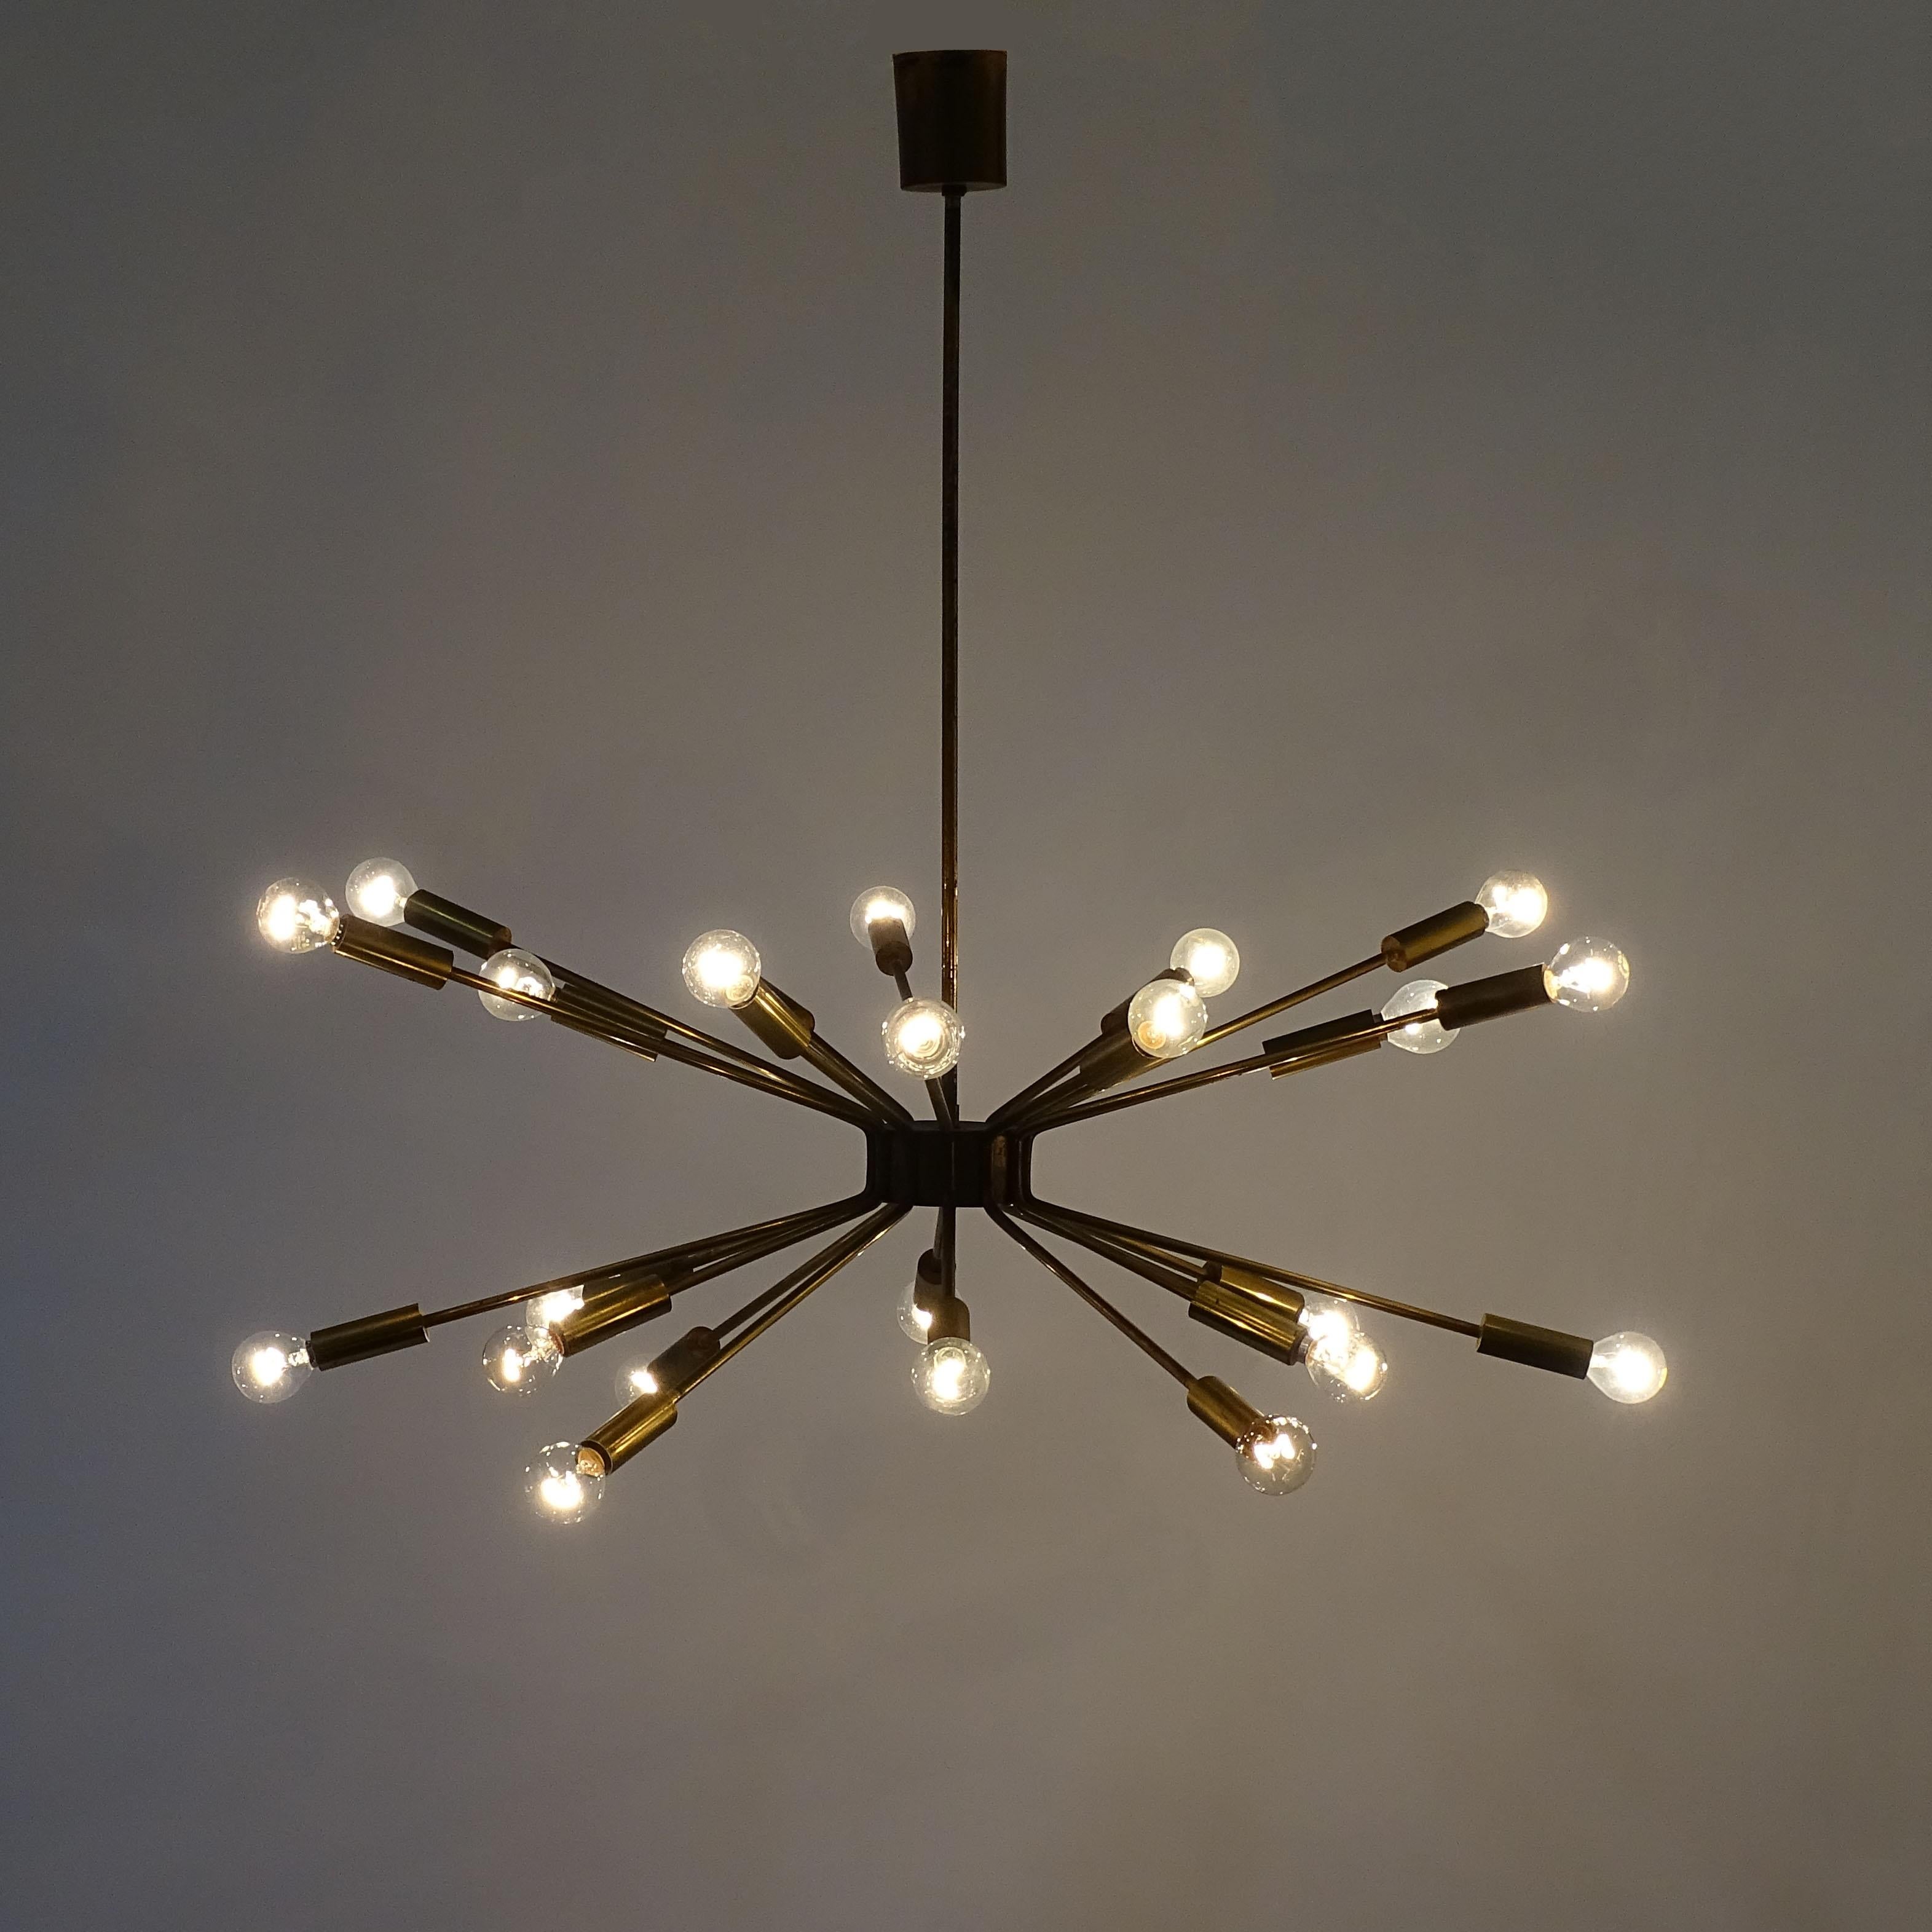 Mid-20th Century Gino Sarfatti for Arteluce 'Fireworks' Brass Ceiling Lamp, Italy 1939 For Sale